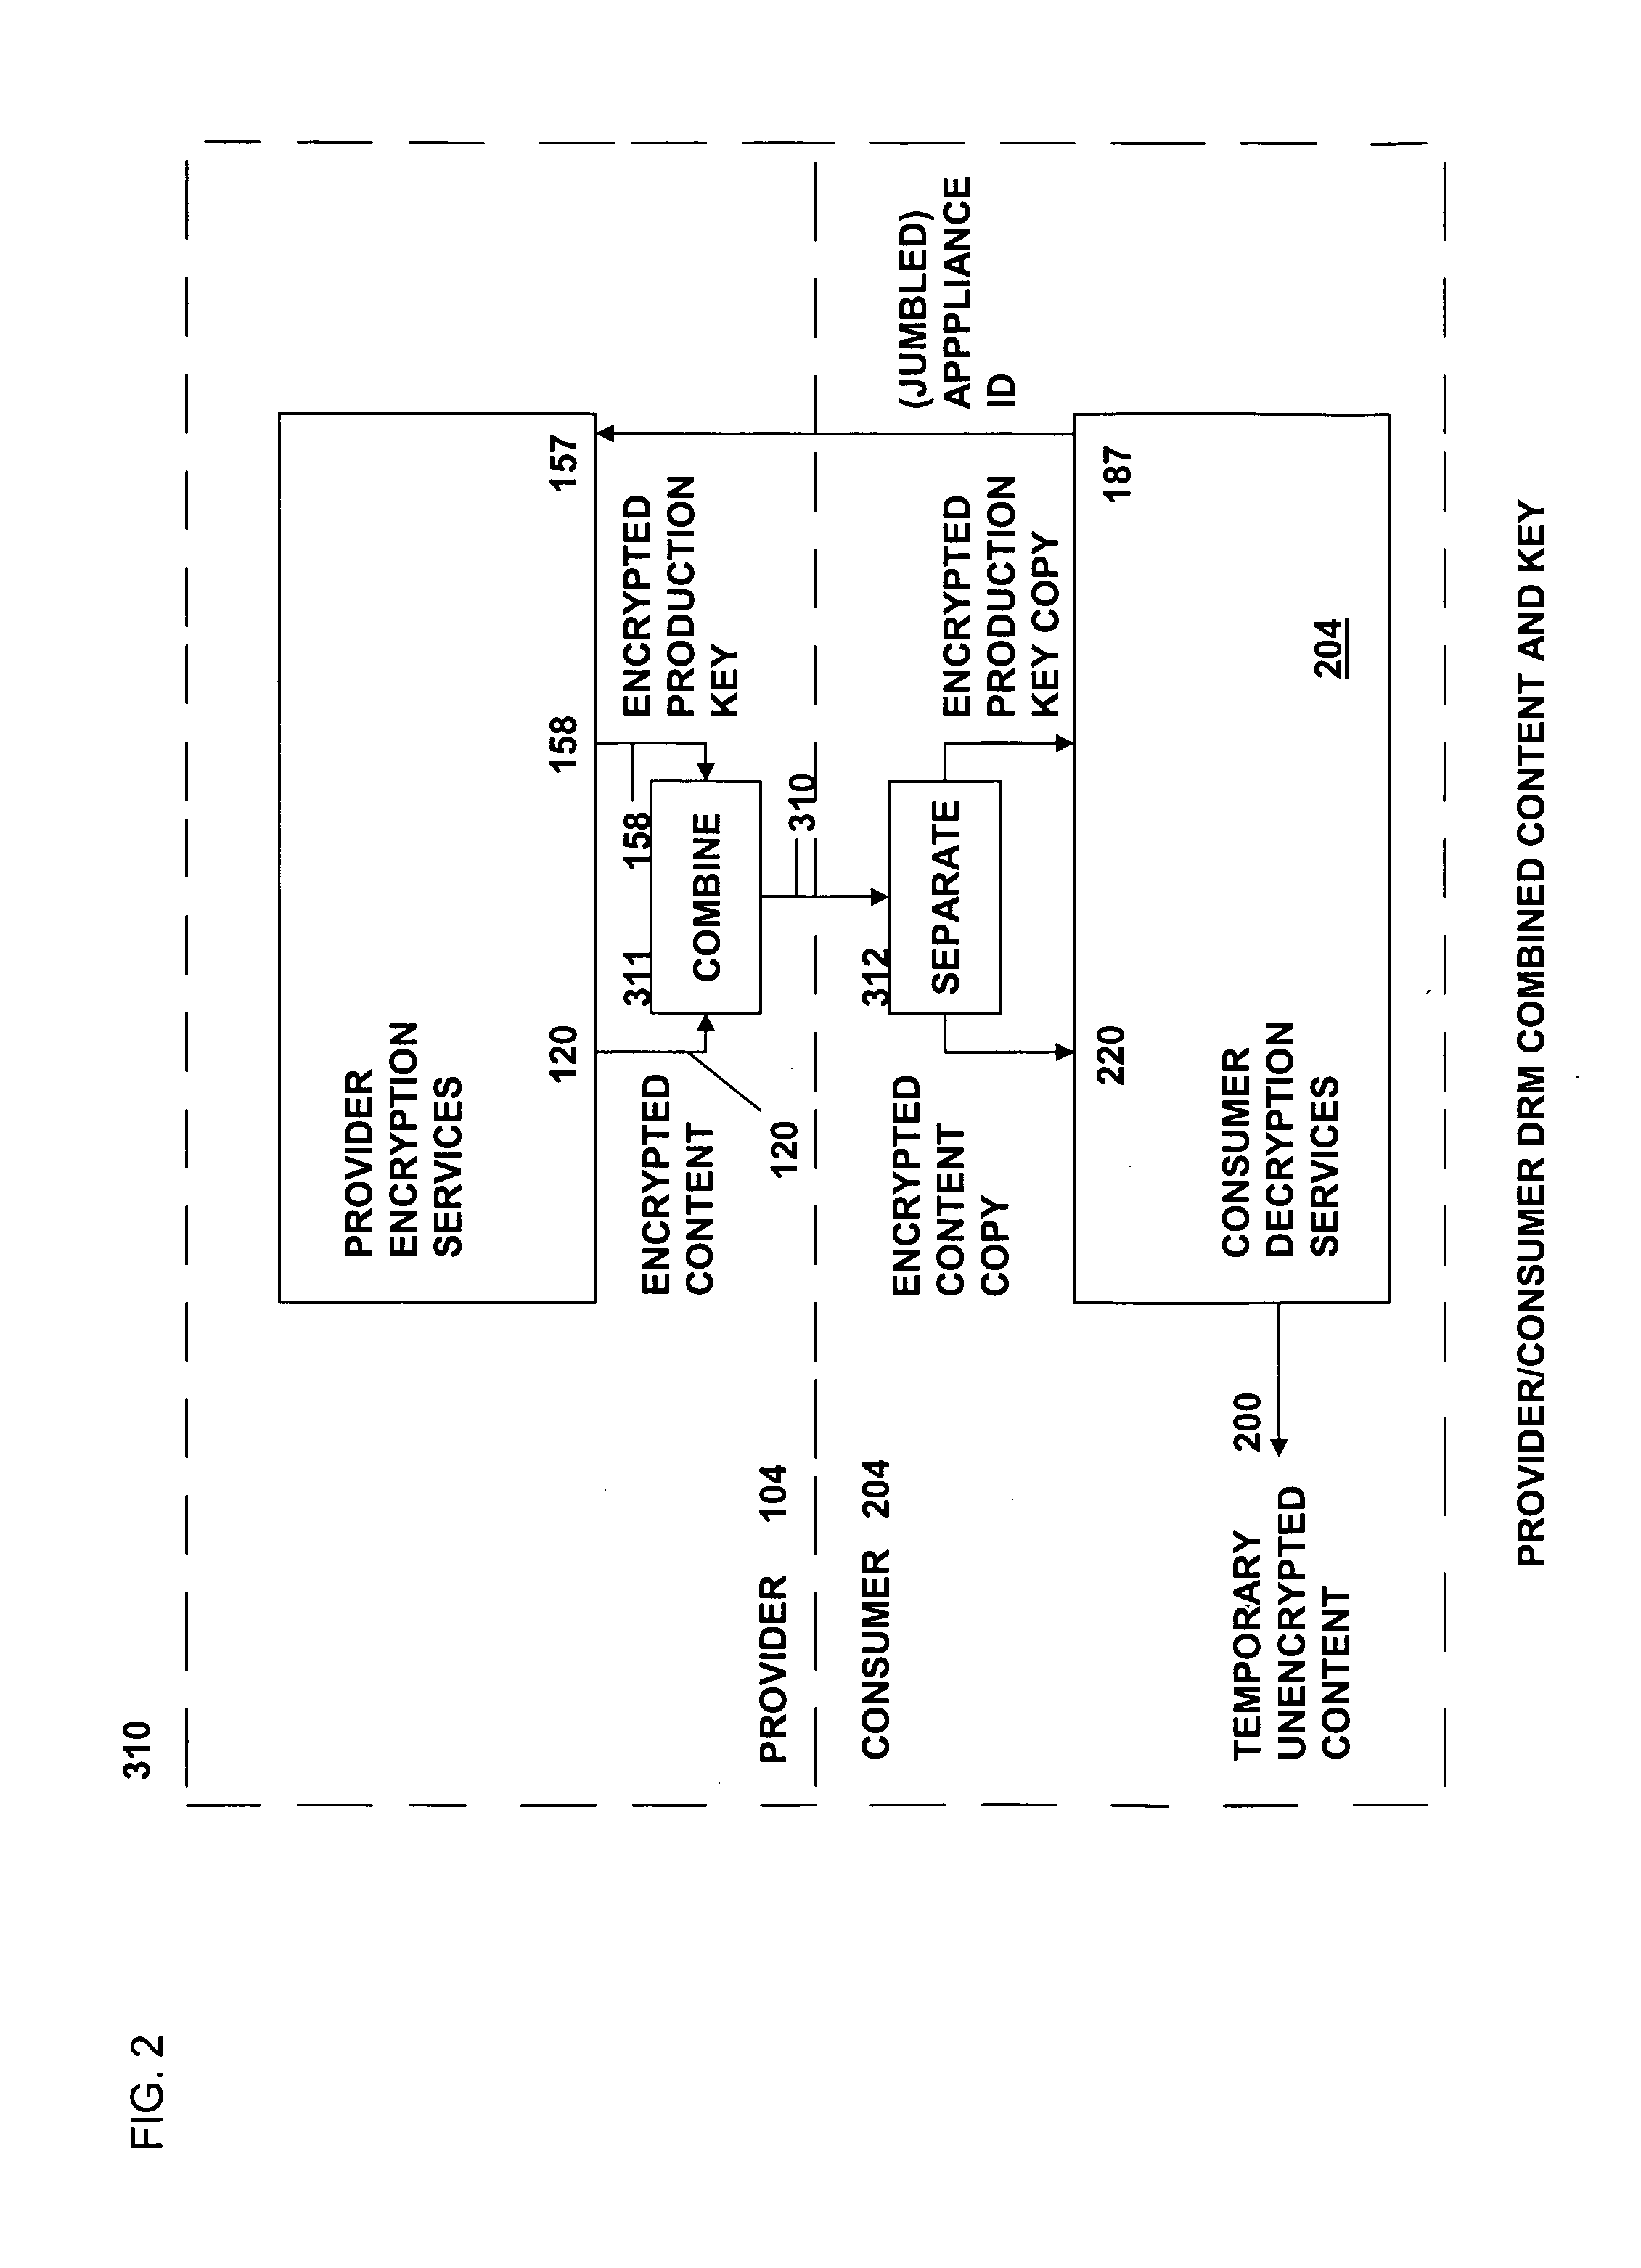 Method and system for secure distribution of selected content to be protected on an appliance-specific basis with definable permitted associated usage rights for the selected content